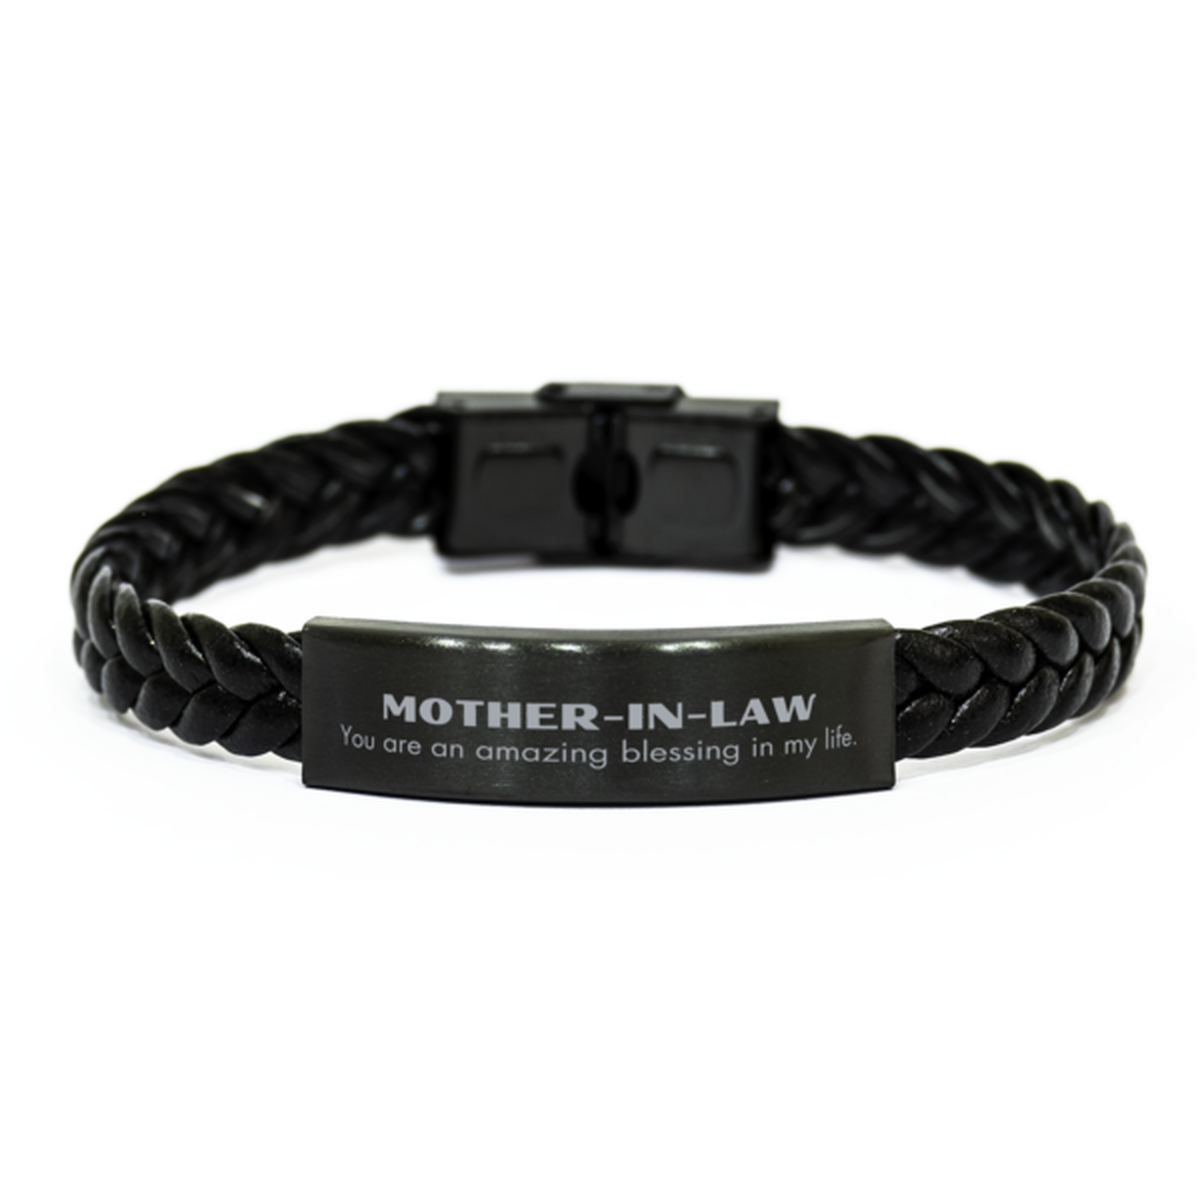 Mother-In-Law Braided Leather Bracelet, You are an amazing blessing in my life, Thank You Gifts For Mother-In-Law, Inspirational Birthday Christmas Unique Gifts For Mother-In-Law